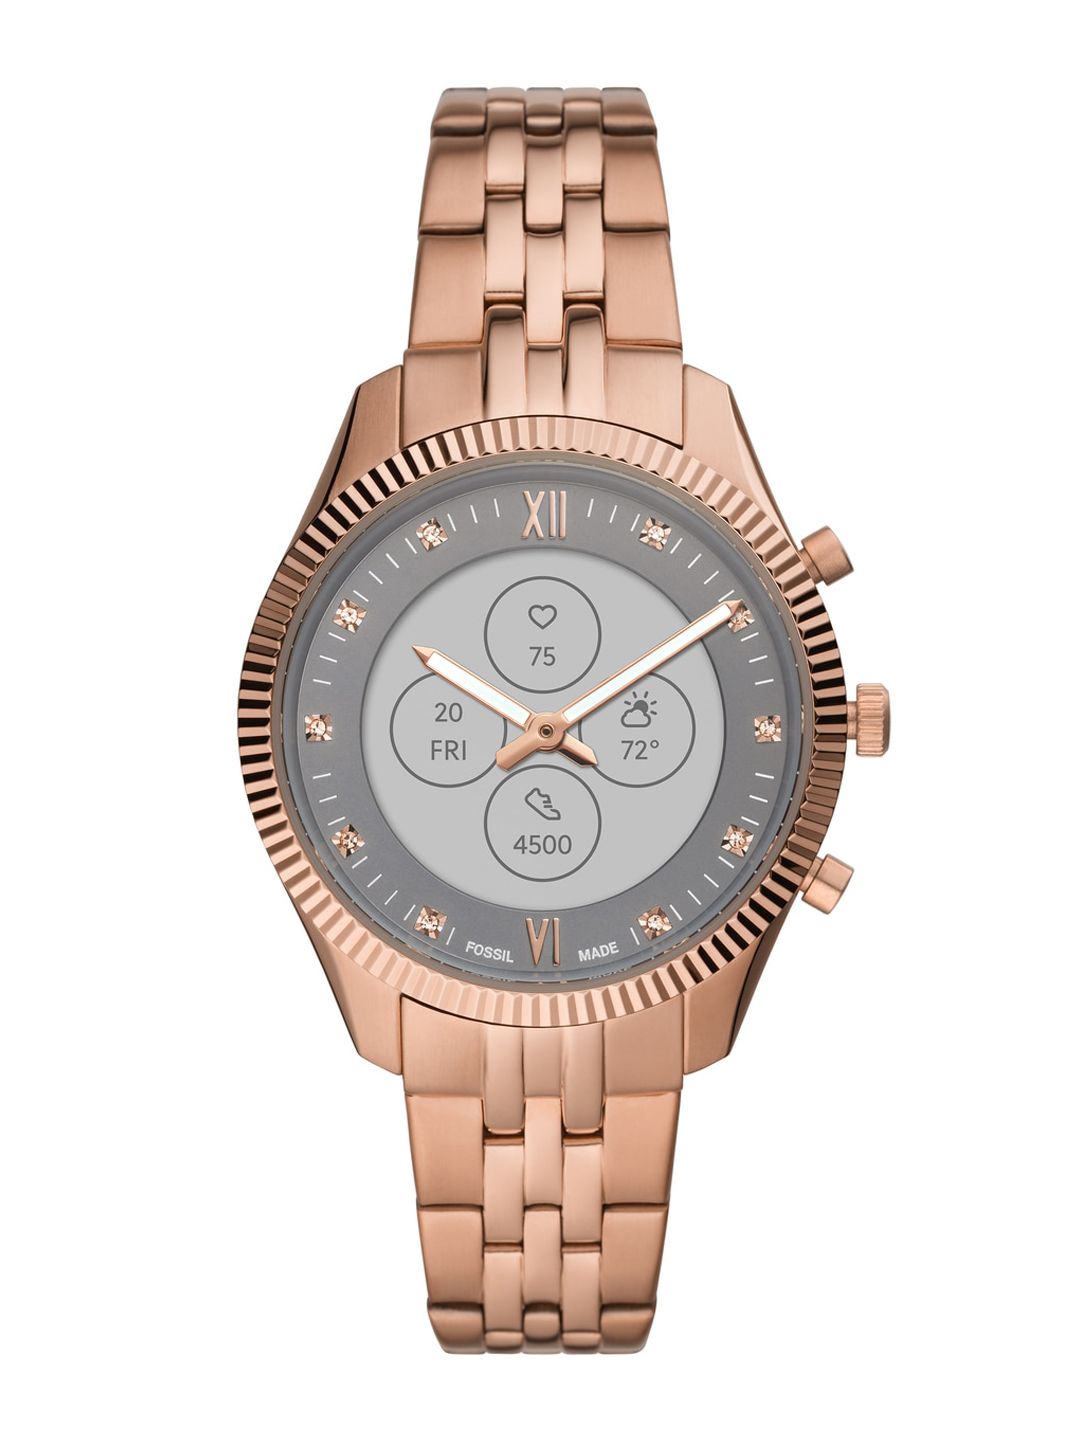 Fossil Women Rose Gold-Toned Scarlette Hybrid HR Smartwatch FTW7043 Price in India